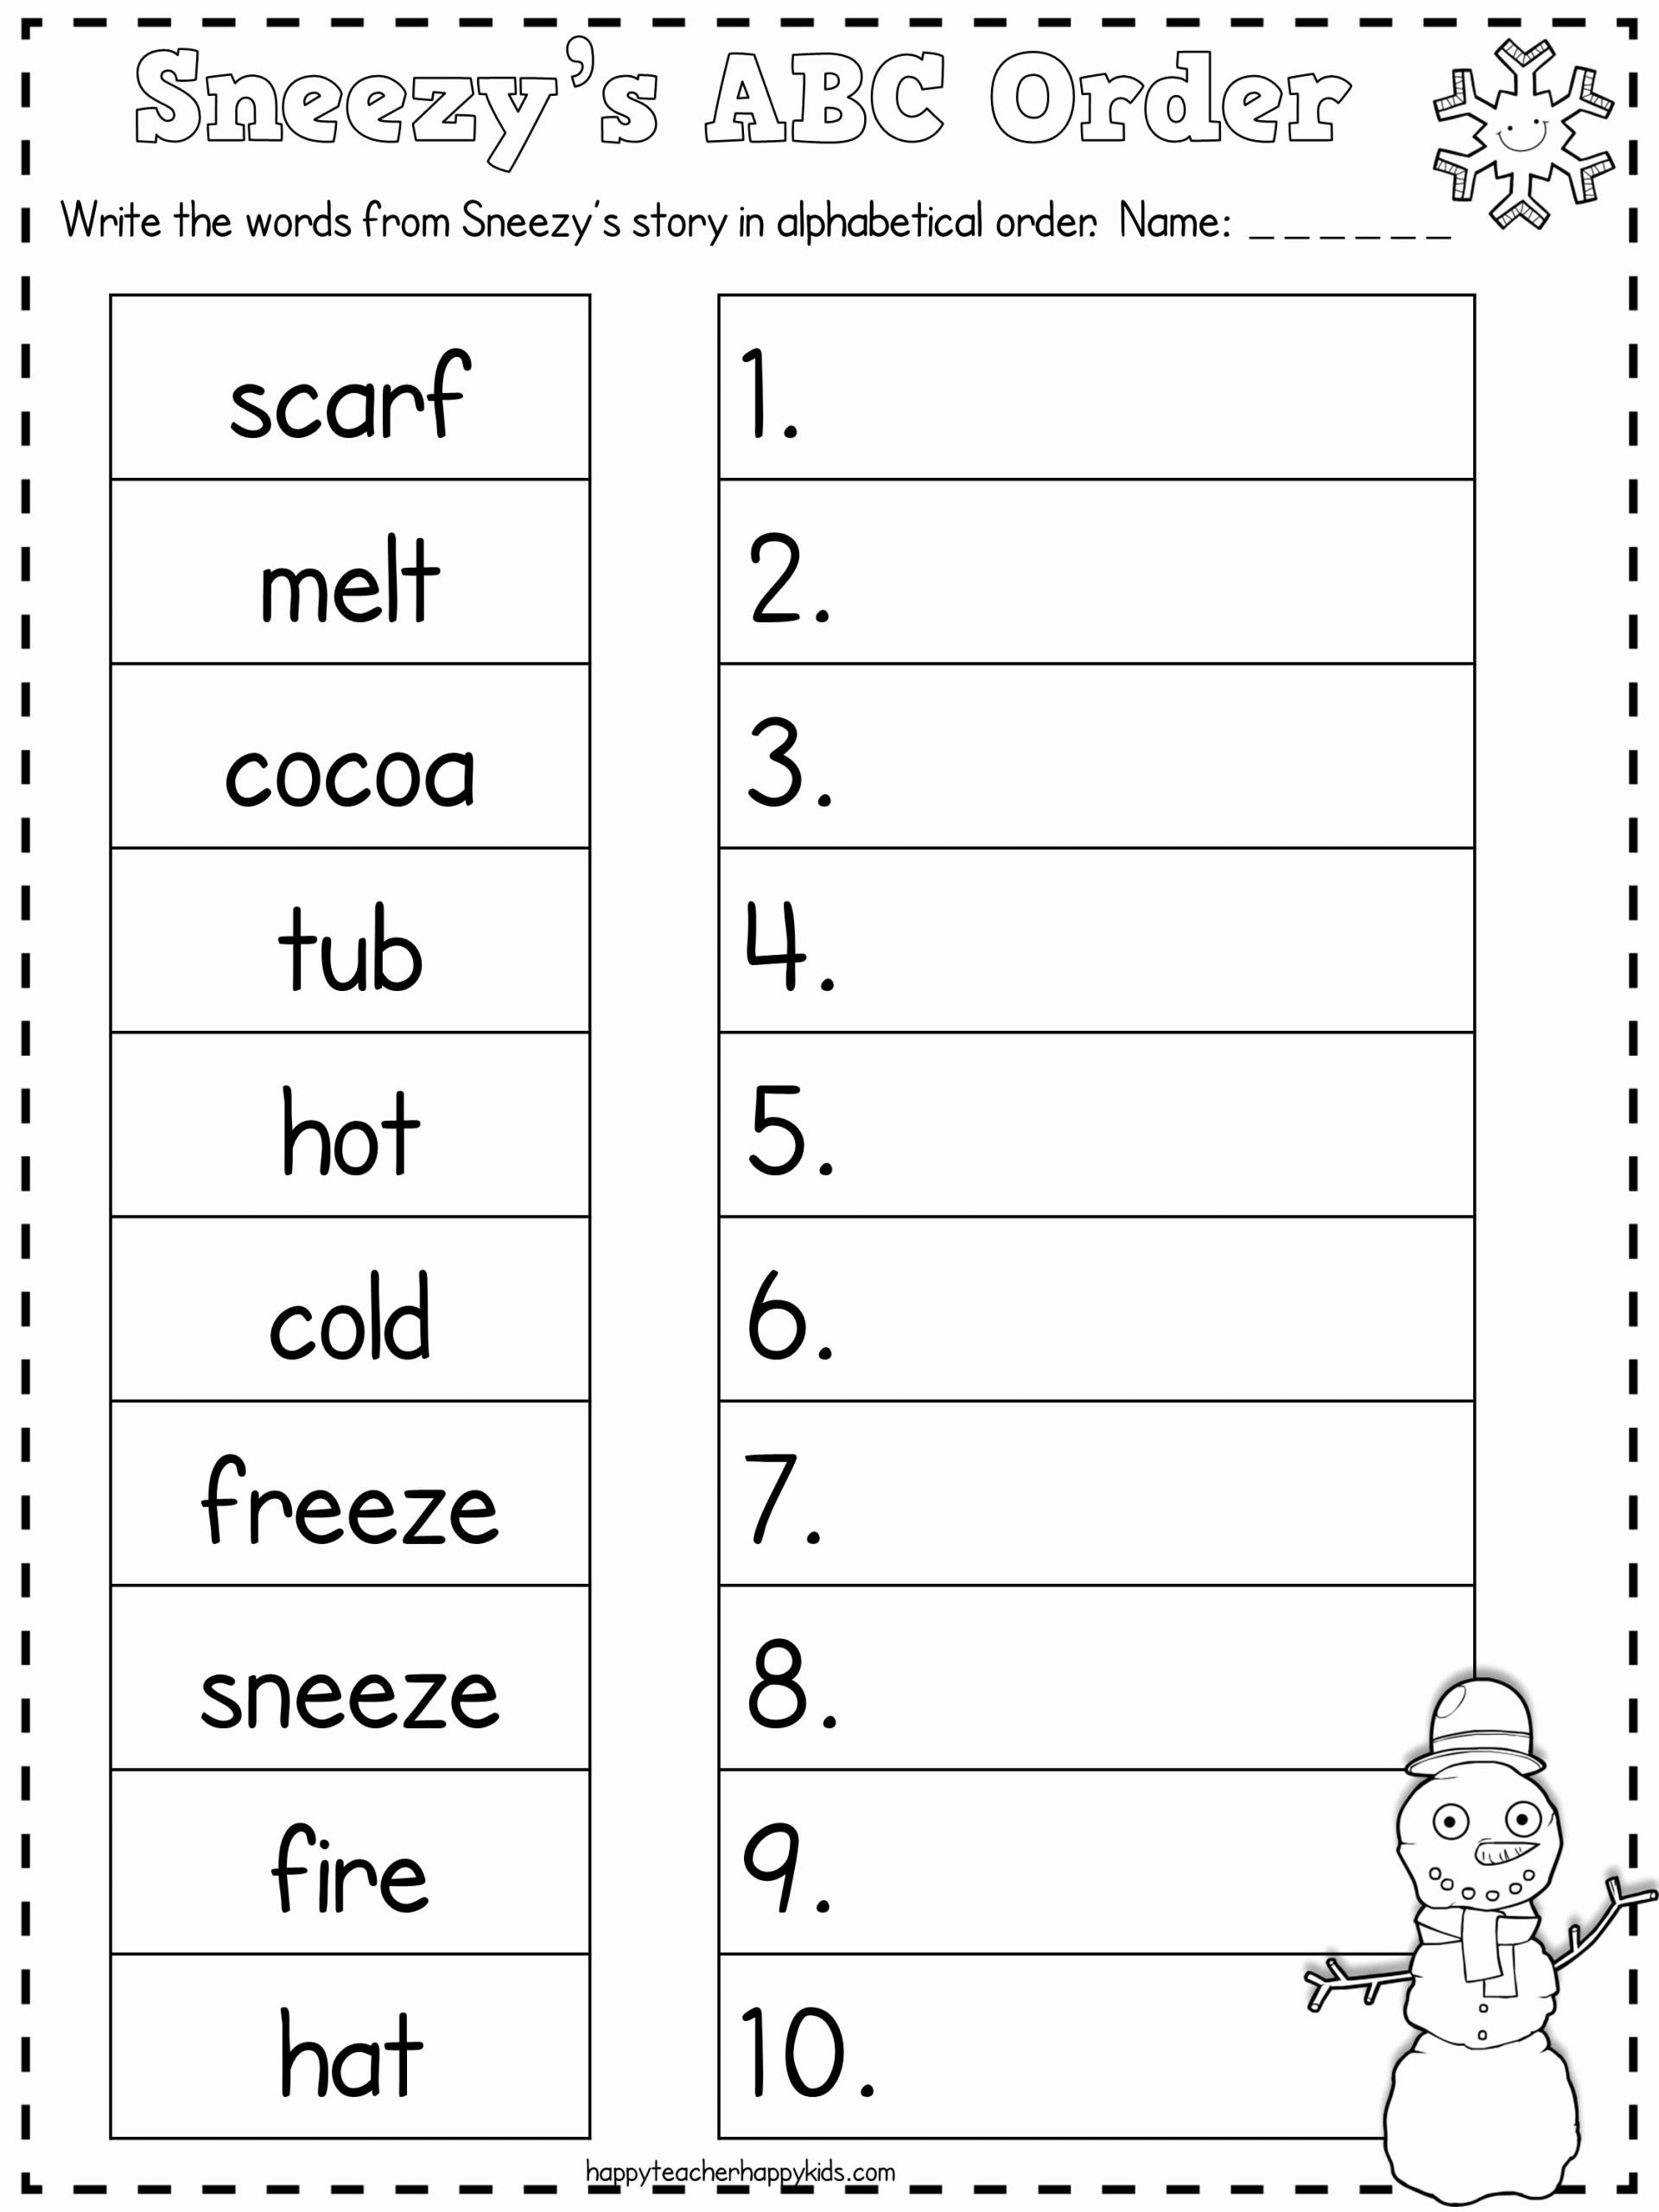 Alphabetical order Worksheets 2nd Grade New Sneezy the Snowman Ideas